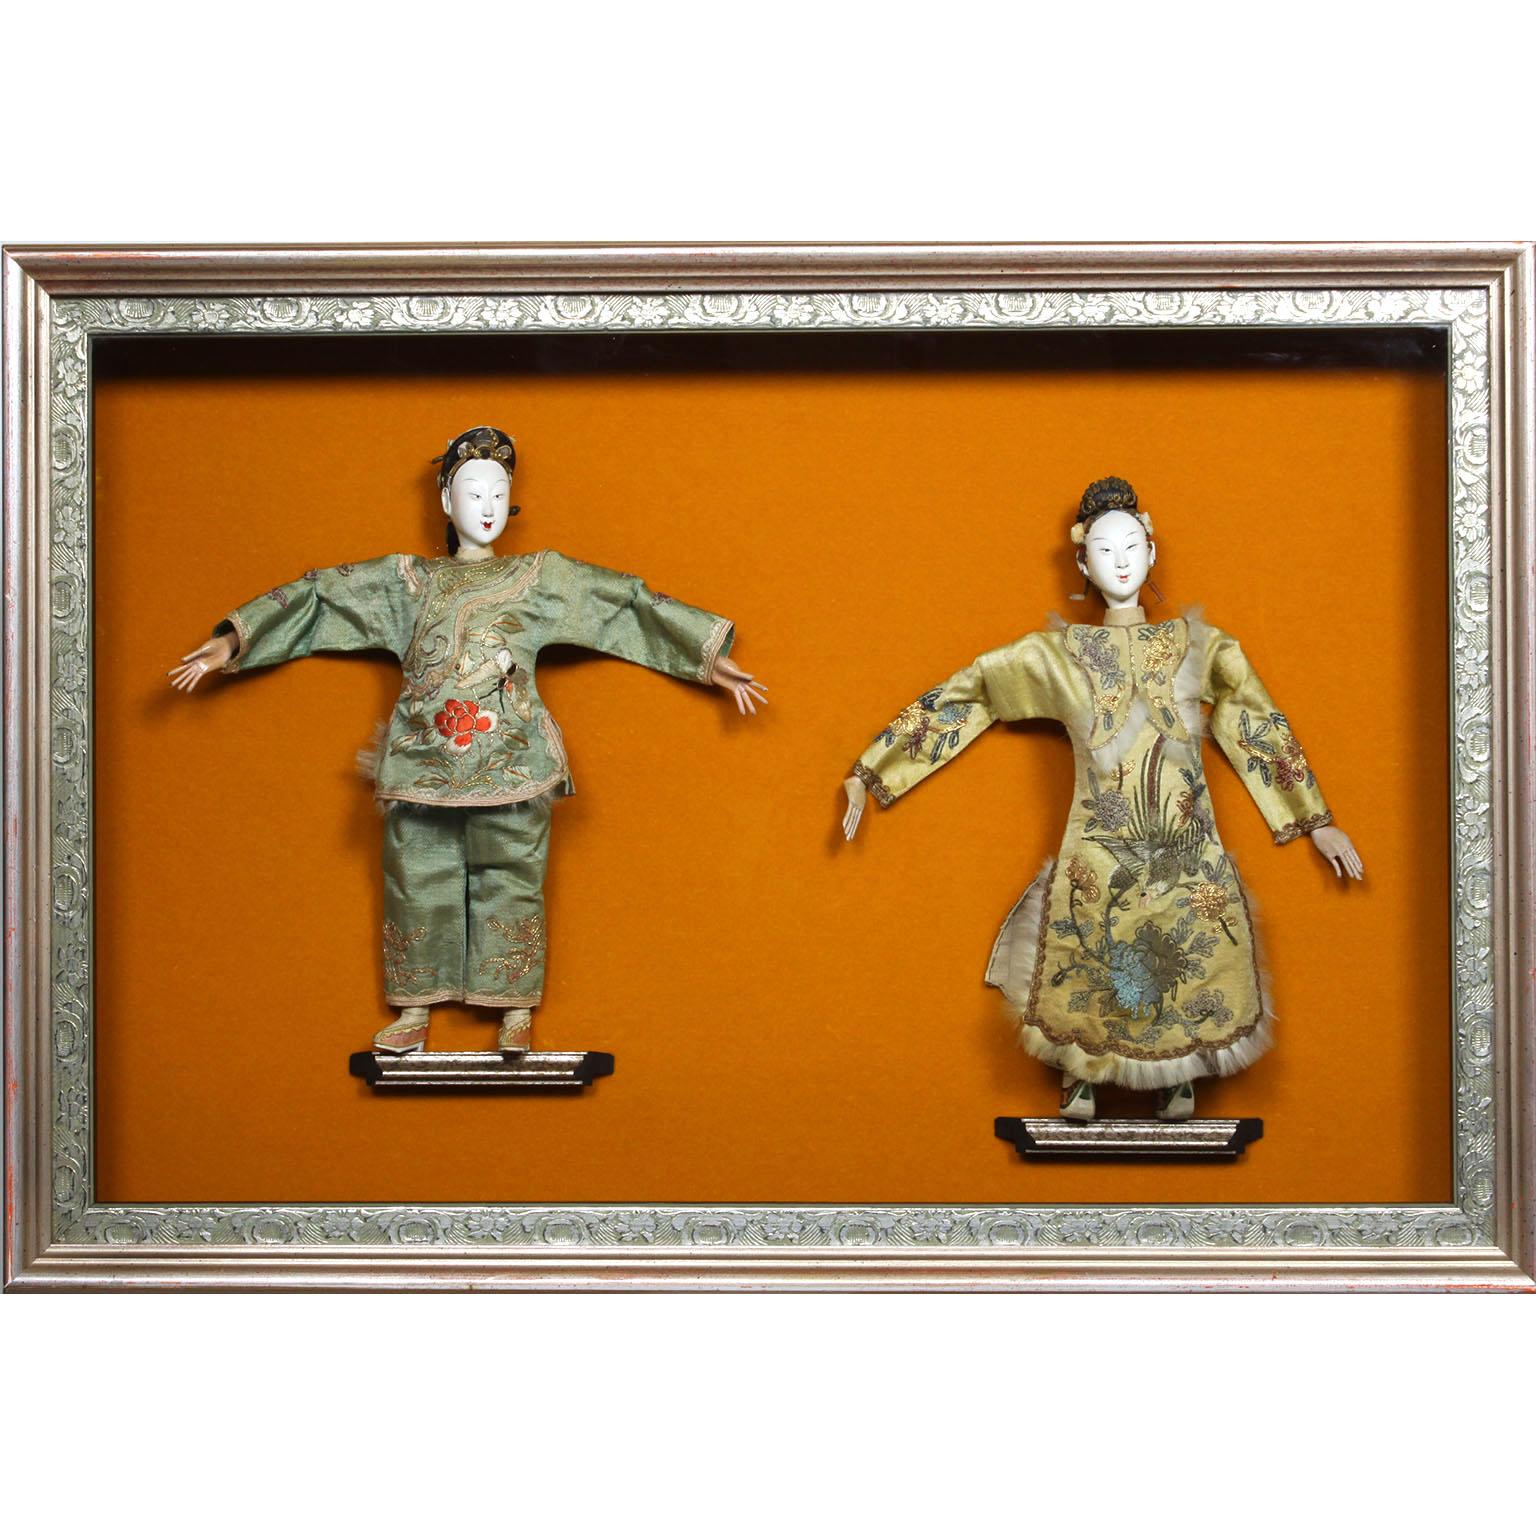 A fine and rare set of four Chinese 19th-20th century Henan Opera dolls. The beautifully carved soft wood, paper mâché and paste dolls of three female Opera performers and one male, all with finely painted heads, sandals and hands, wearing